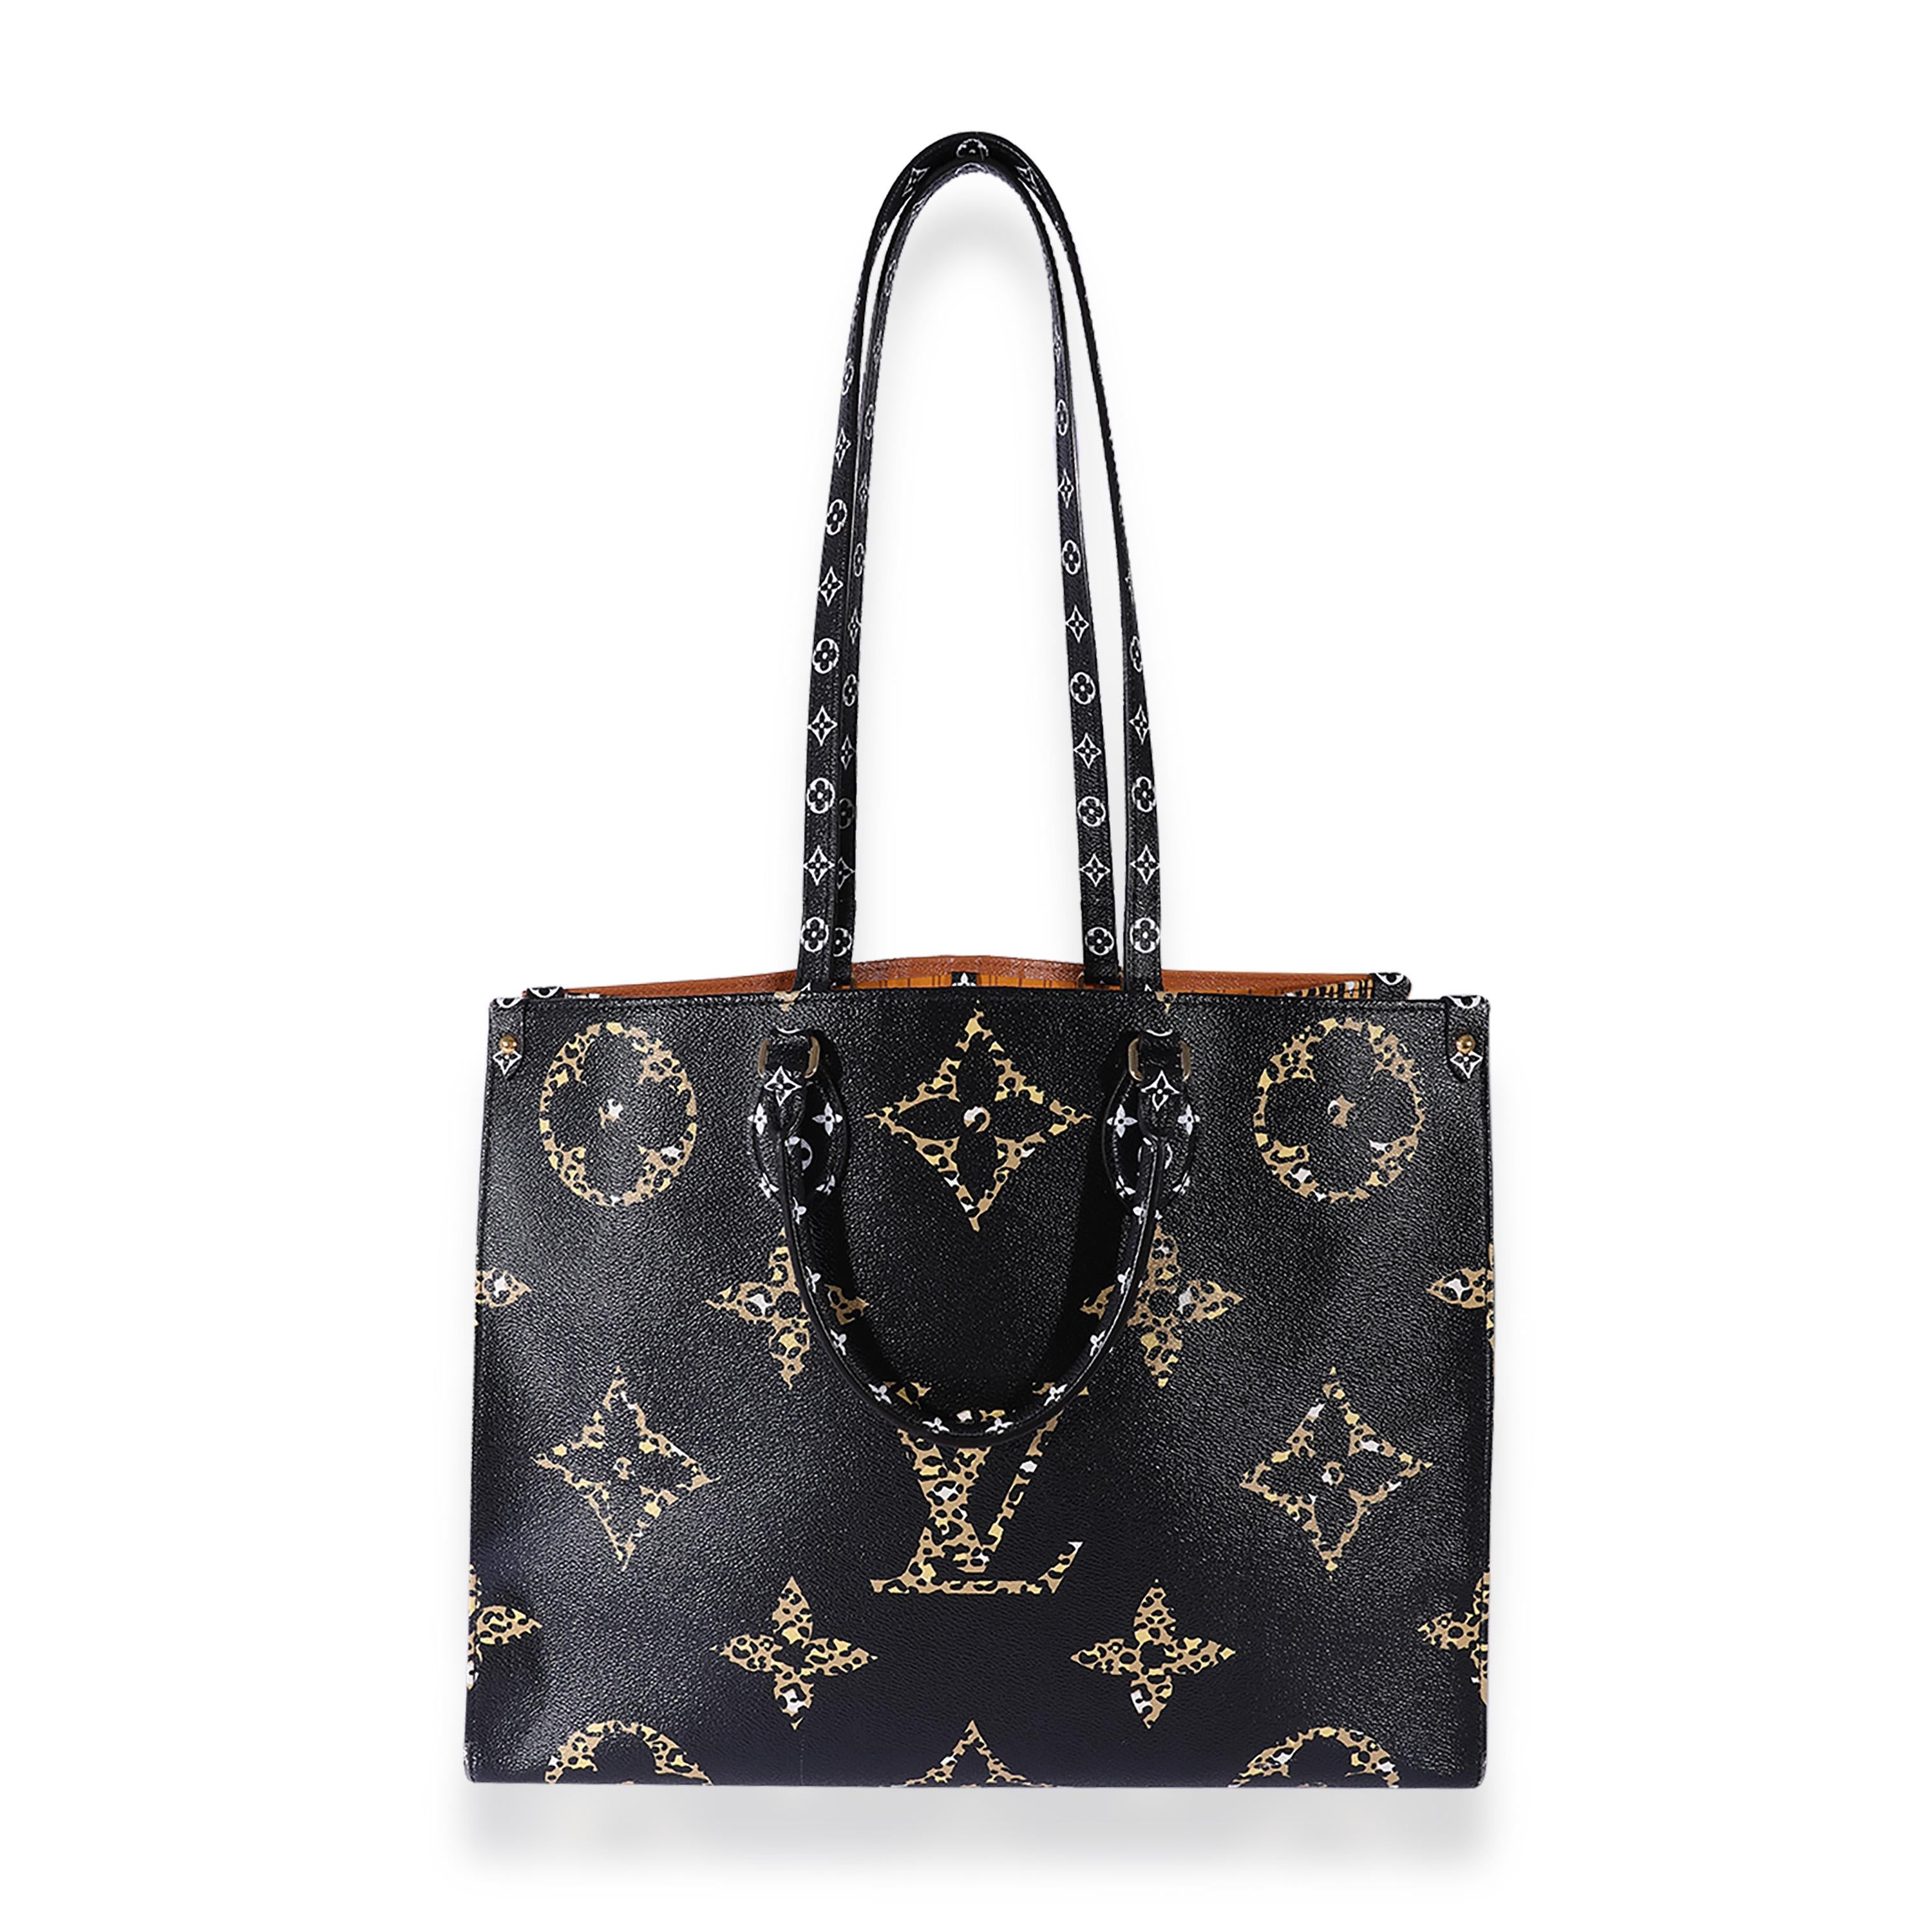 Listing Title: Louis Vuitton Jungle Canvas Onthego GM
SKU: 125152
Condition: Pre-owned 
Handbag Condition: Good
Condition Comments: Good Condition. Scuffing and marks throughout exterior. Heavy corner scuffing. Light scratching at hardware. Heavy